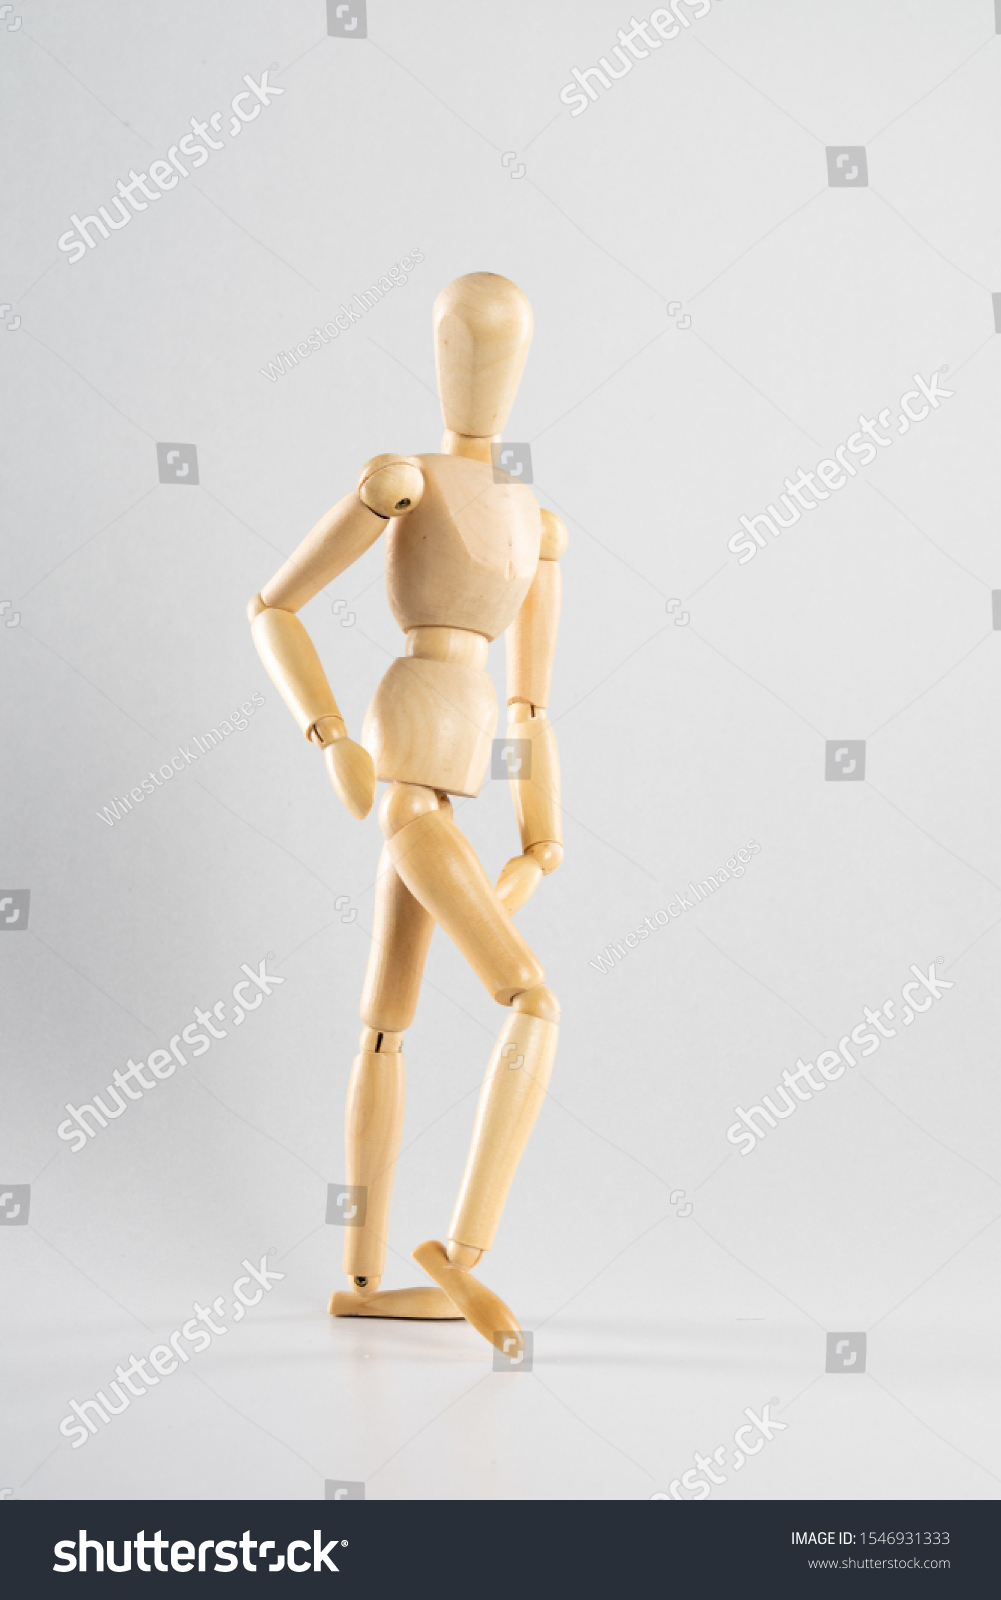 A vertical shot of a wooden pose doll posed like walking  on a white background #1546931333